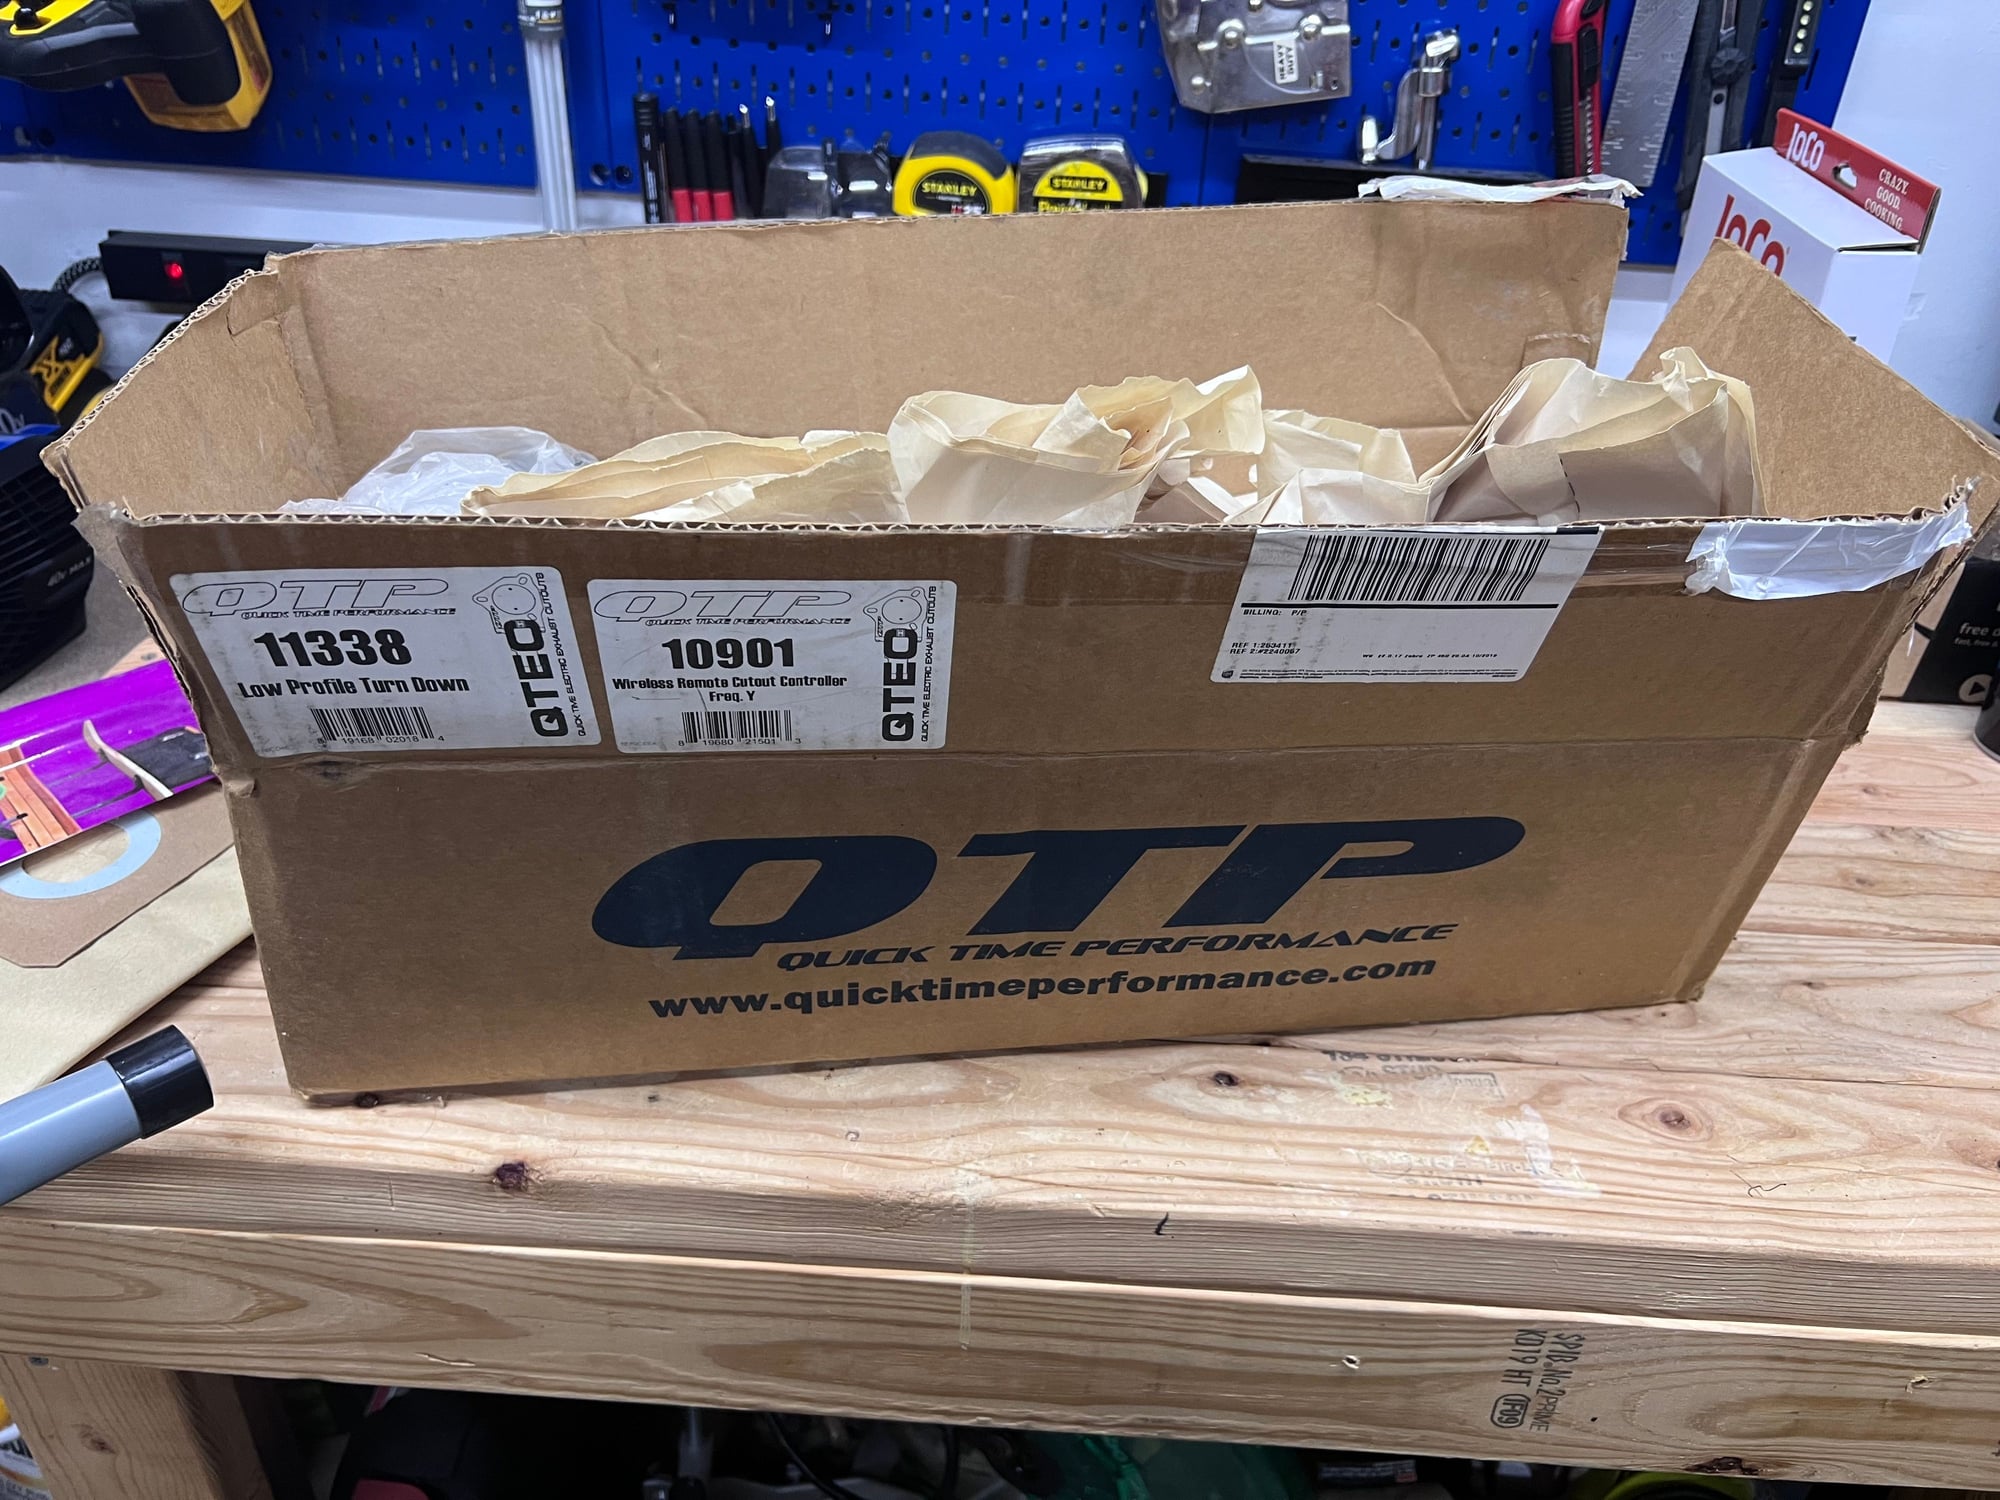 Engine - Exhaust - New in box never used QTP cut-out kit with remote - New - 0  All Models - Babylon, NY 11702, United States